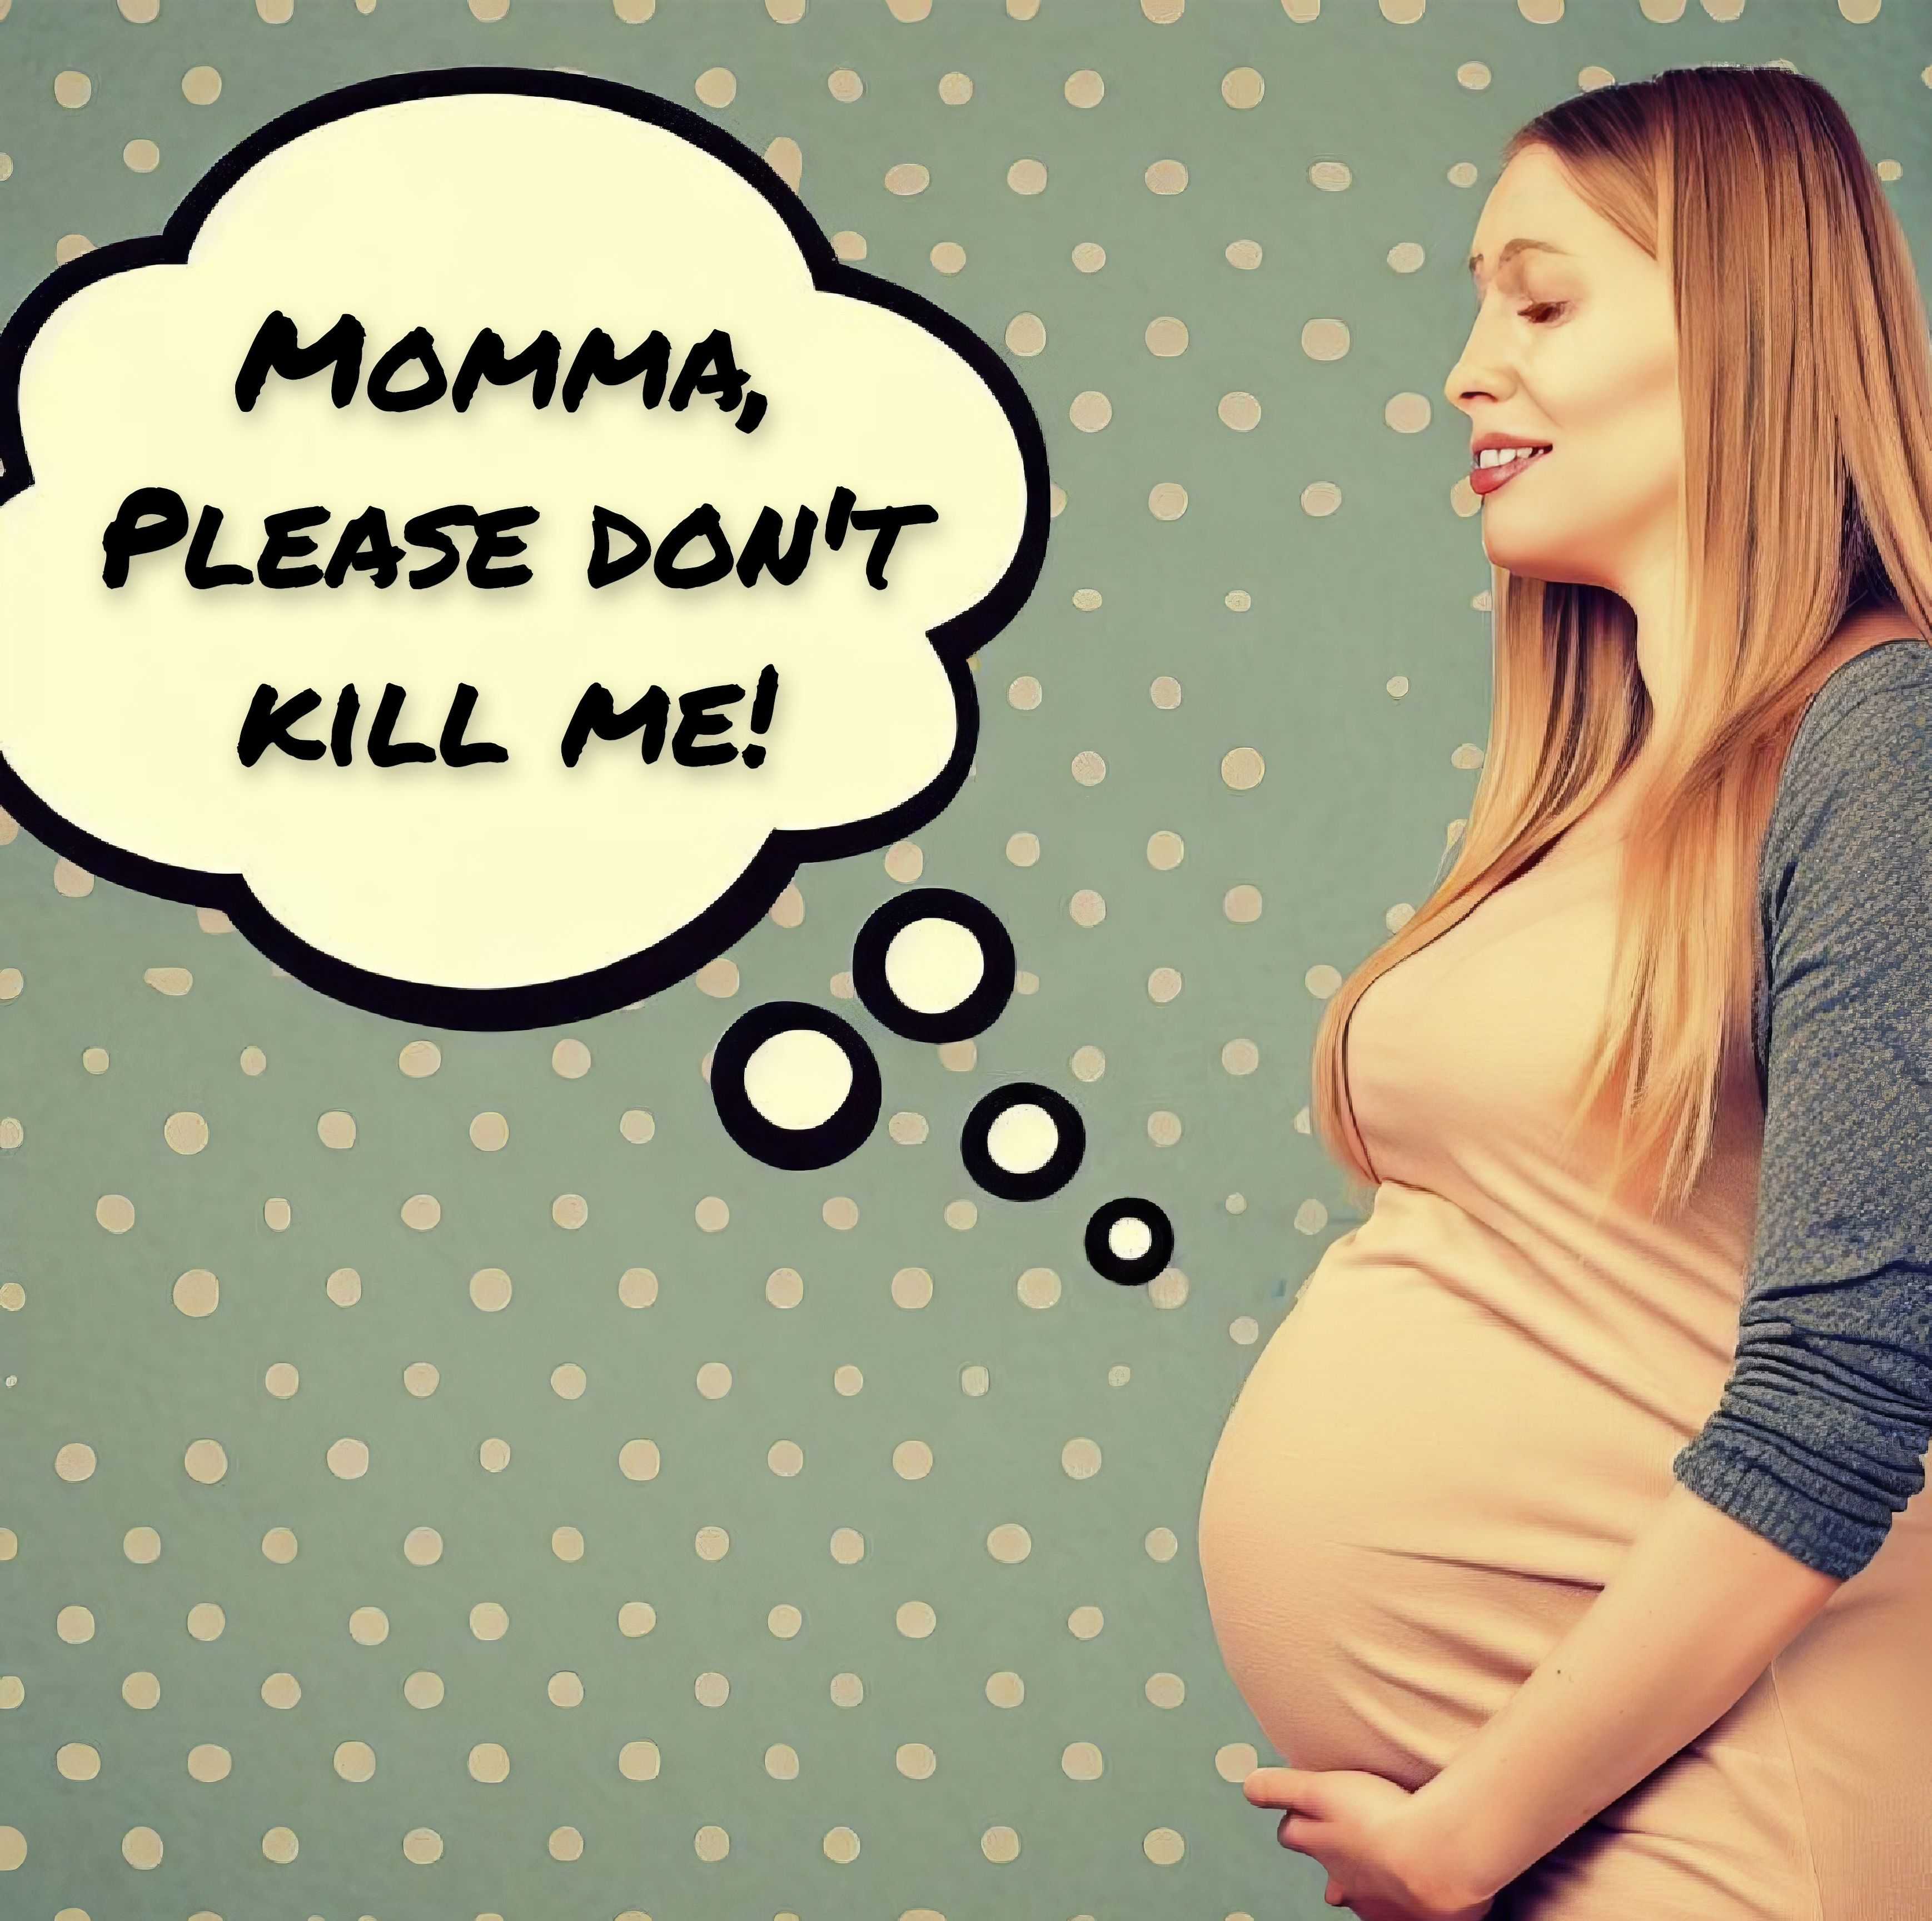 Pregnant young lady. A speech bubble caption emanating from her belly reads "Momma, please don't kill me!"